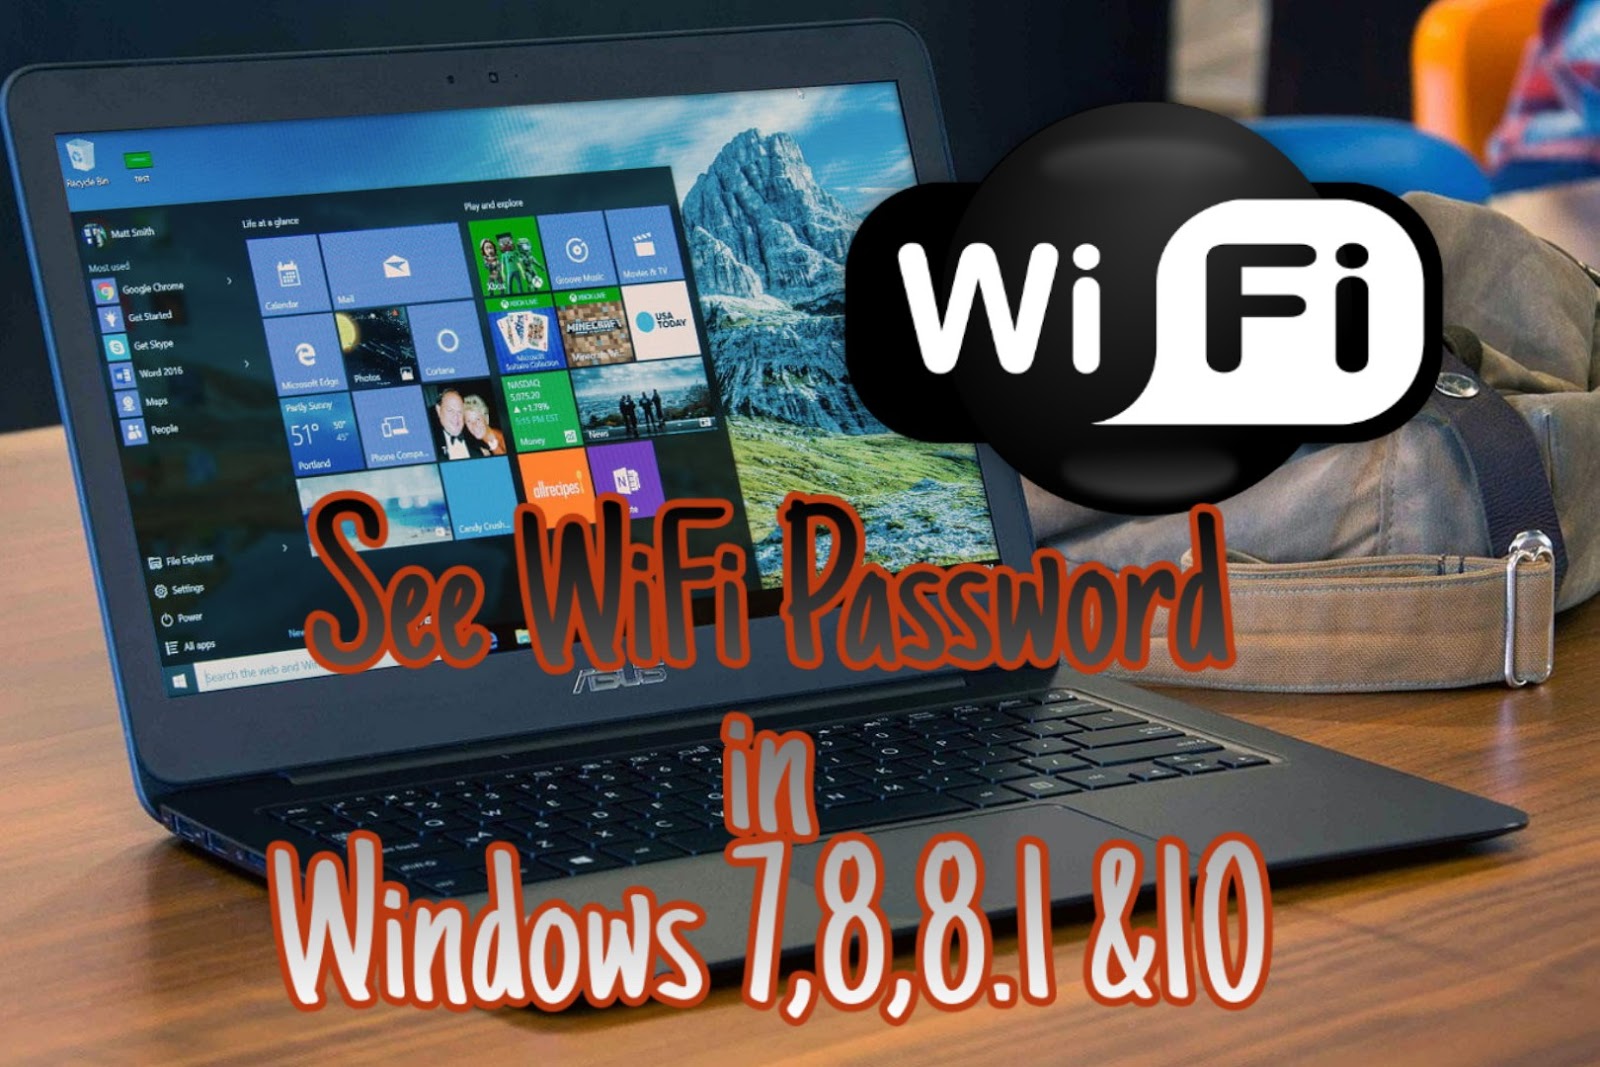 How To Find Wifi Password Windows 10